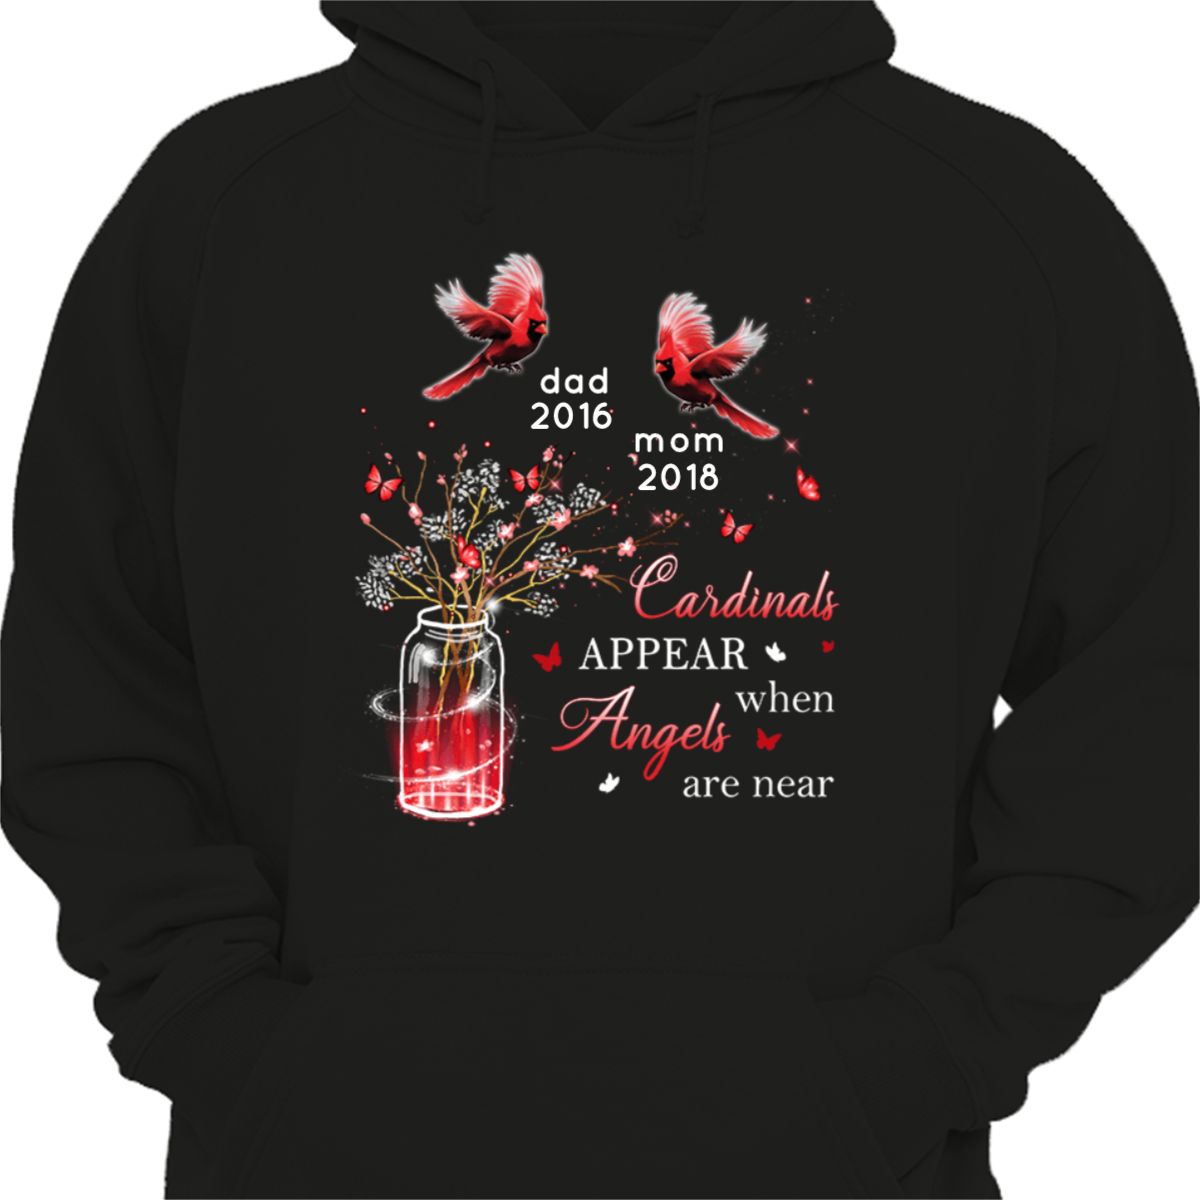 Cardinals In Heaven Personalized Shirt Cardinals In Heaven Personalized Hoodie Sweatshirt